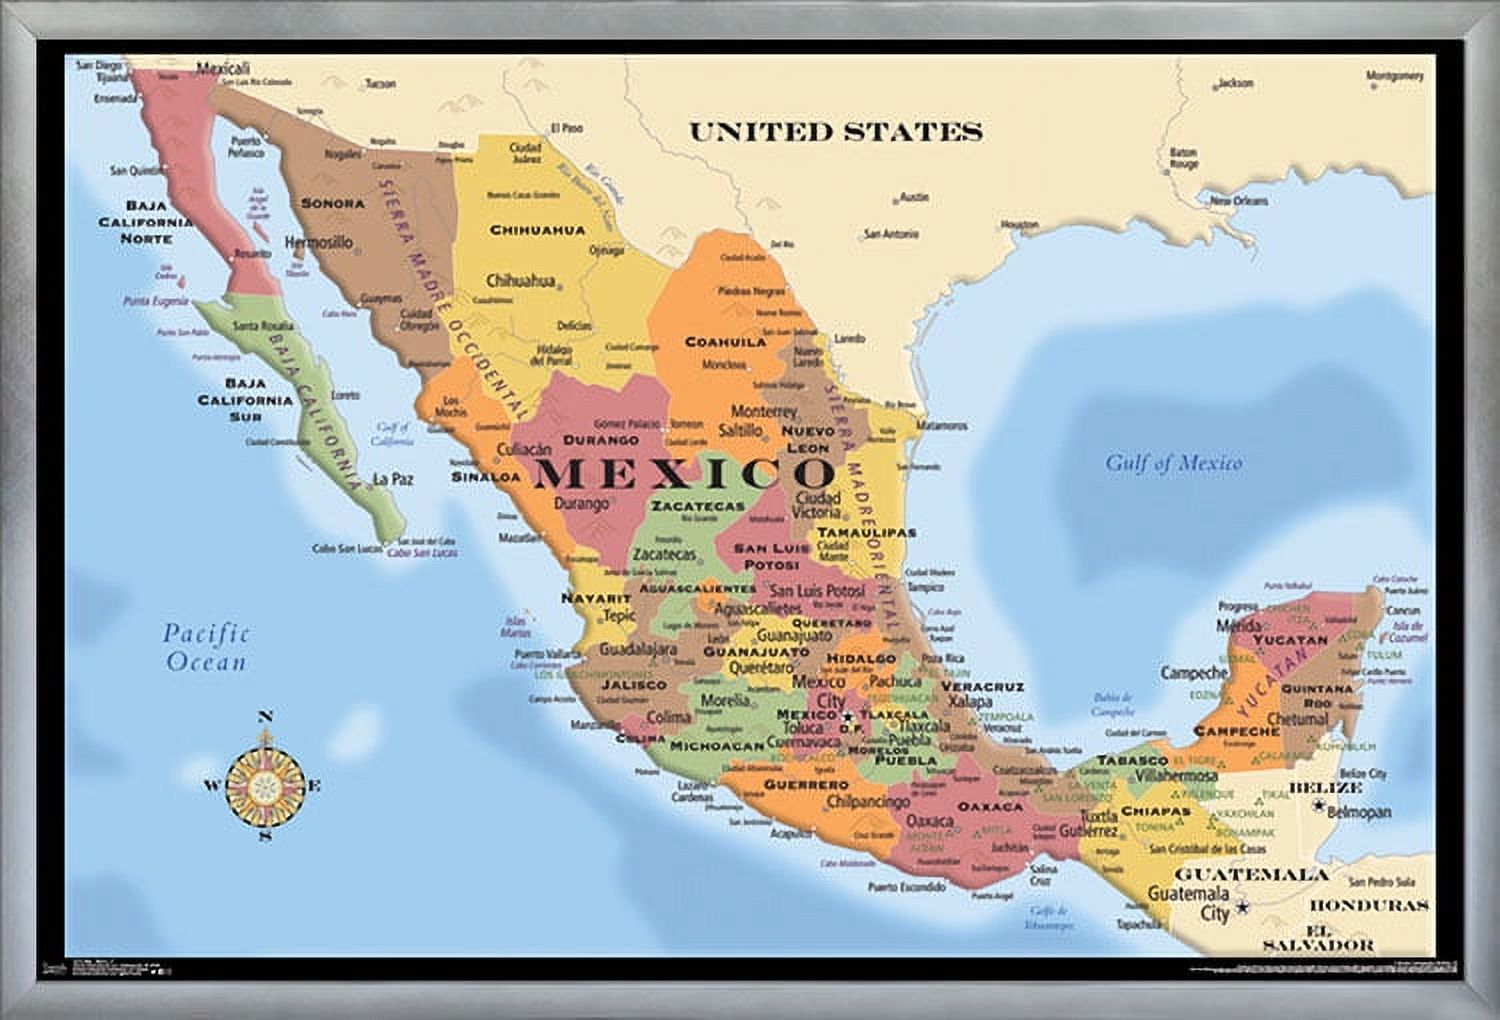 Map - Mexico Wall Poster, 22.375" x 34", Framed - image 1 of 2